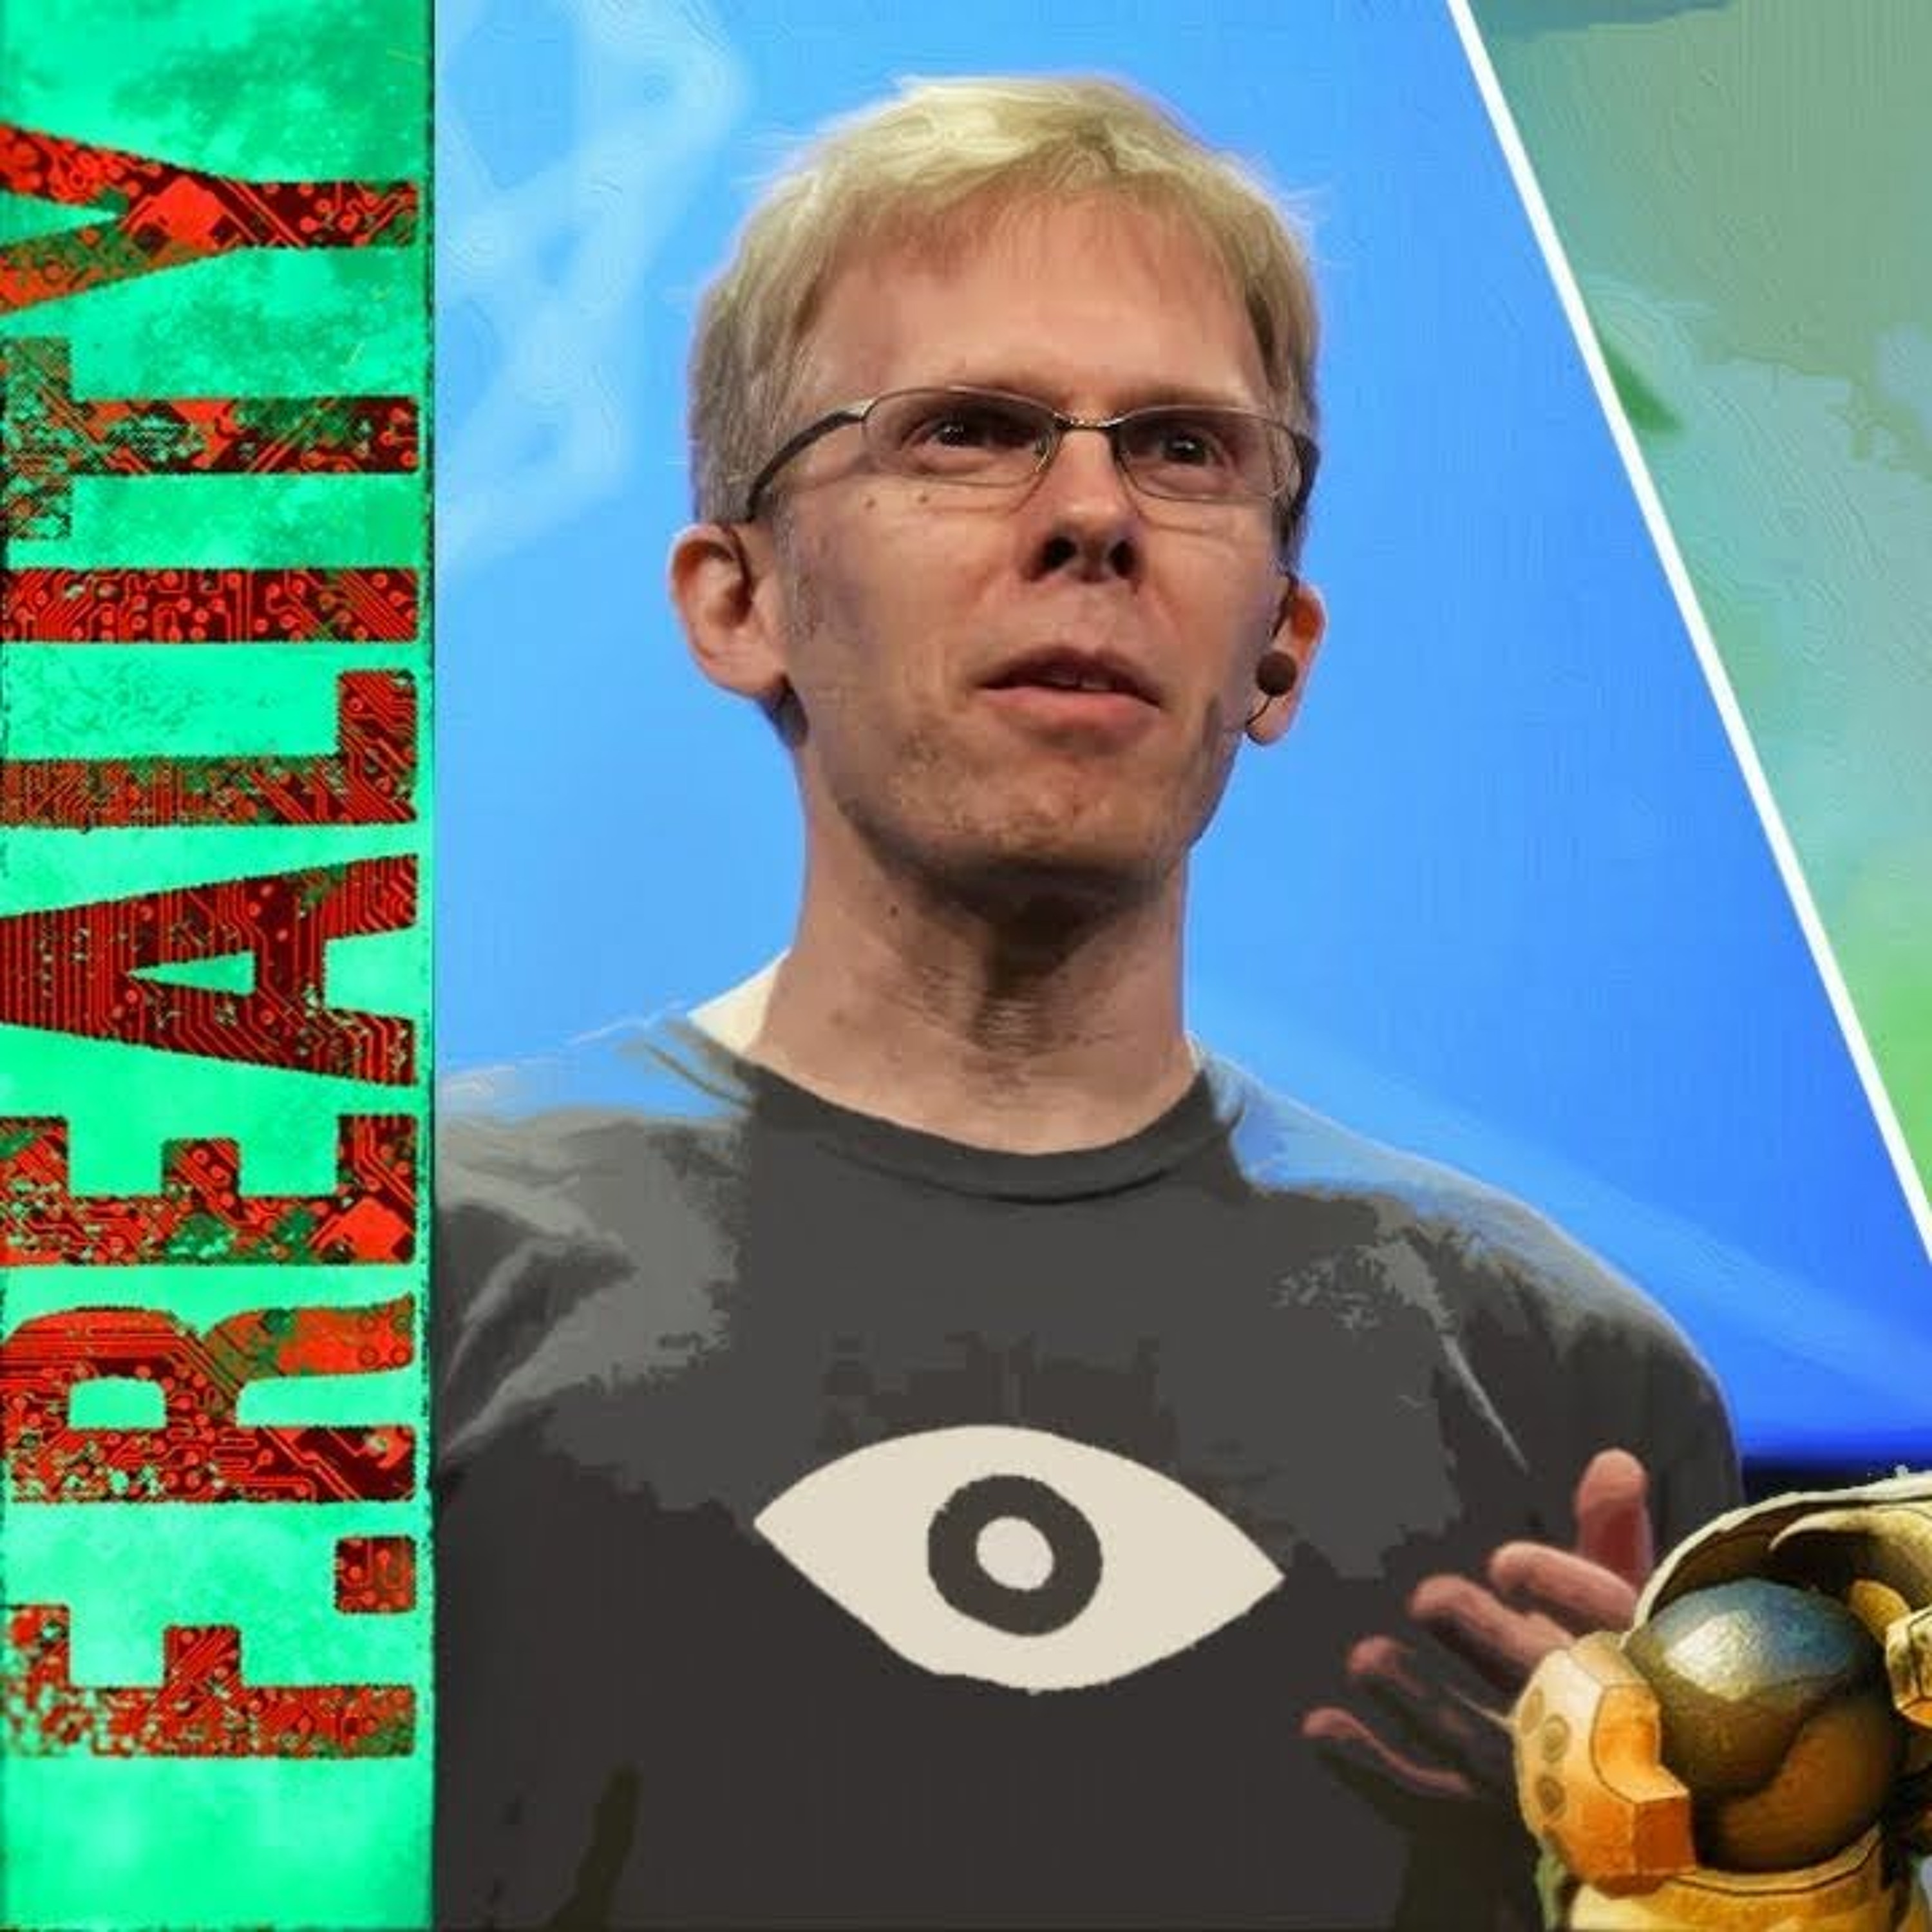 Ep.115 - Stormland VR Review, John Carmack Leaves Oculus & The Climb On Quest